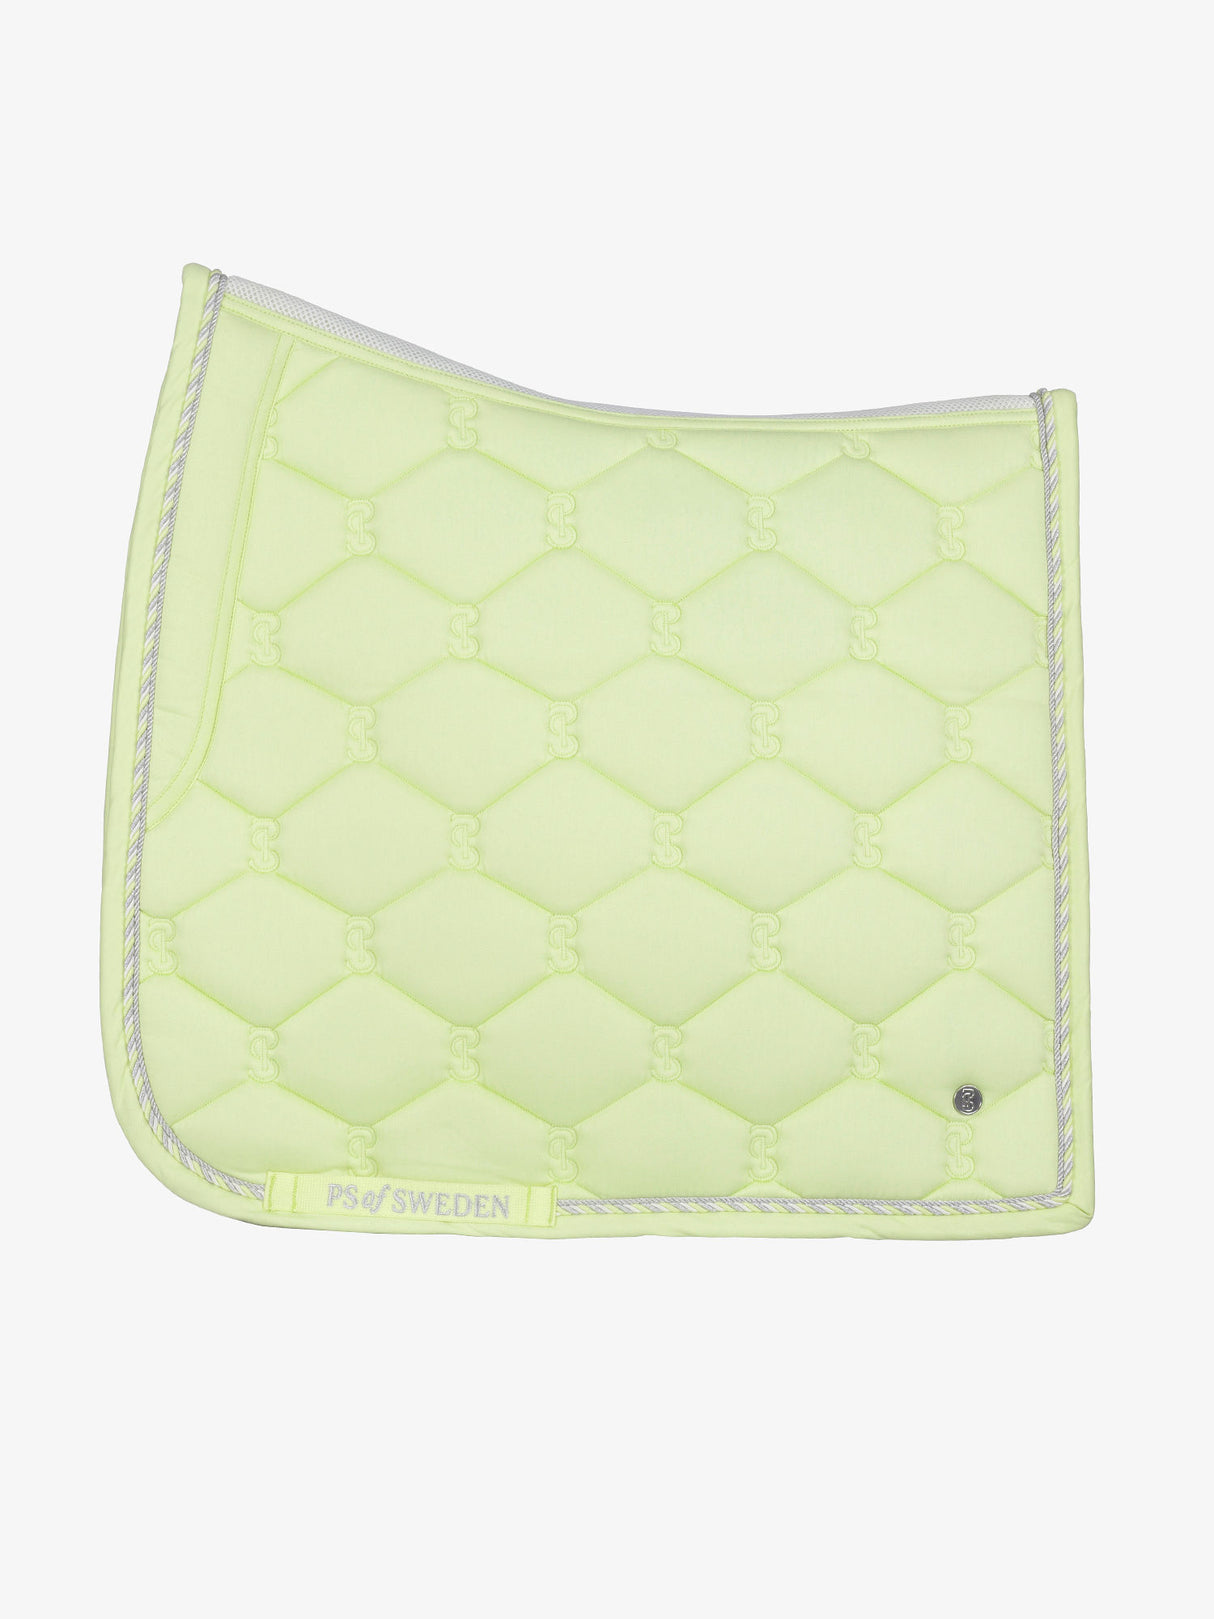 PS of Sweden Classic Dressage Saddle Pad Seed Green